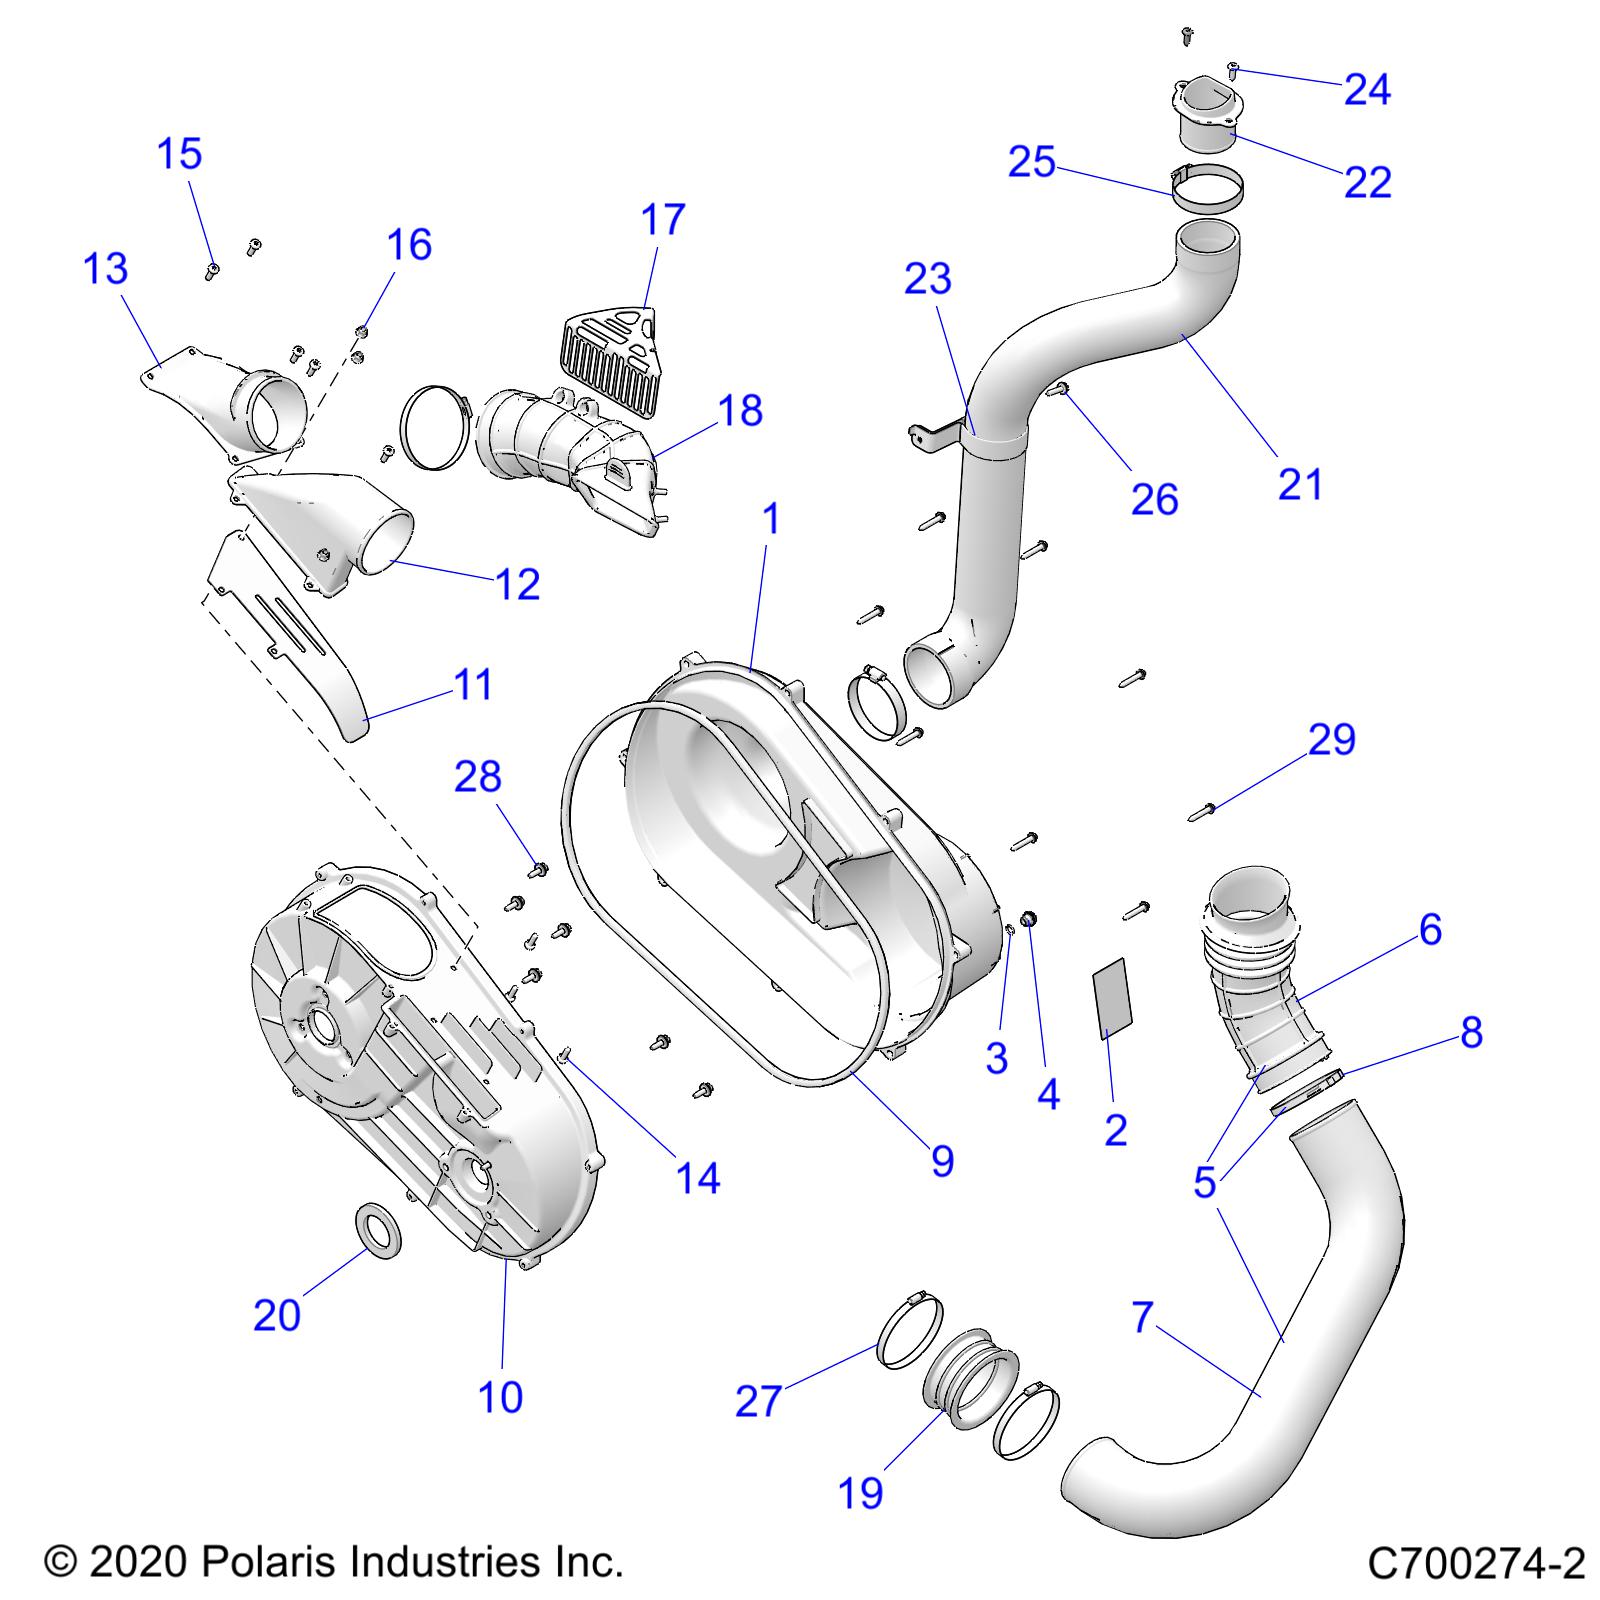 Part Number : 5451776 INTAKE BOOT  PLASTIC